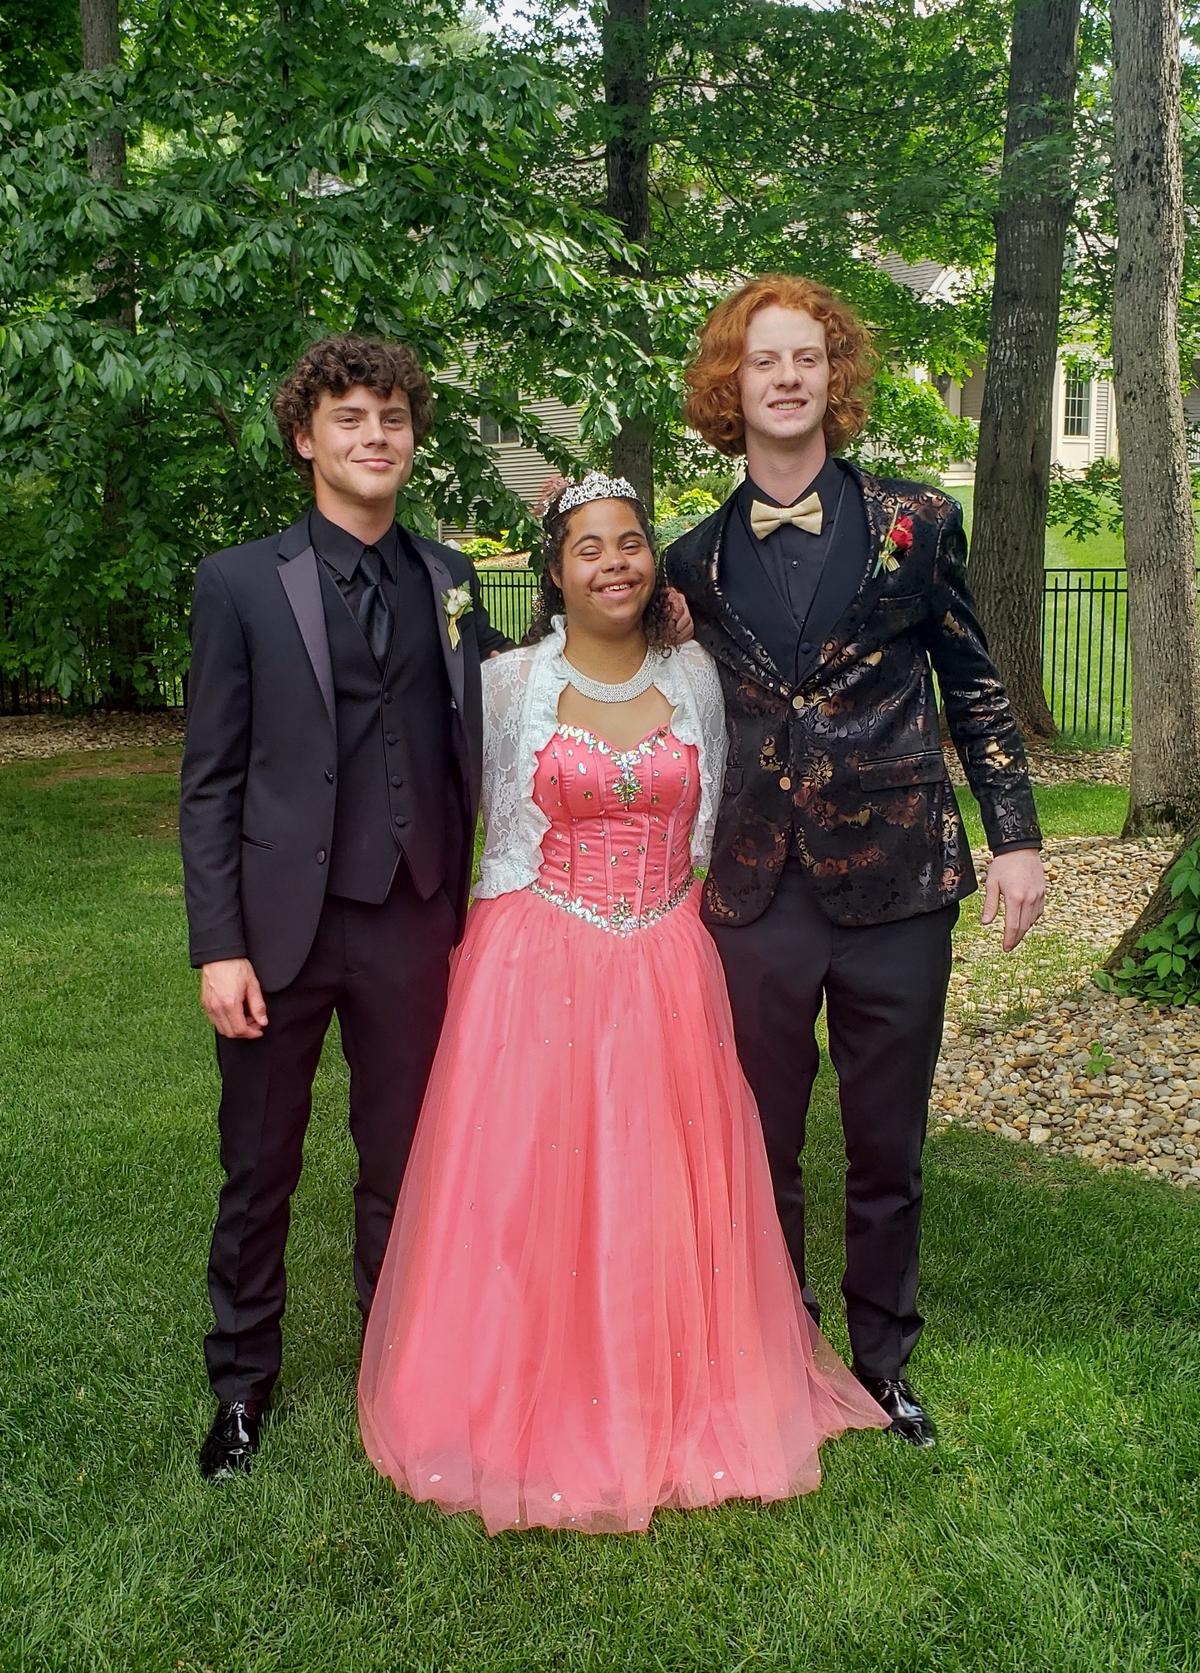 Shayli with her high-school friends, Hunter (L) and Declan, before the prom. (Courtesy of <a href="https://www.facebook.com/lori.ragas">Lori Ragas</a>)